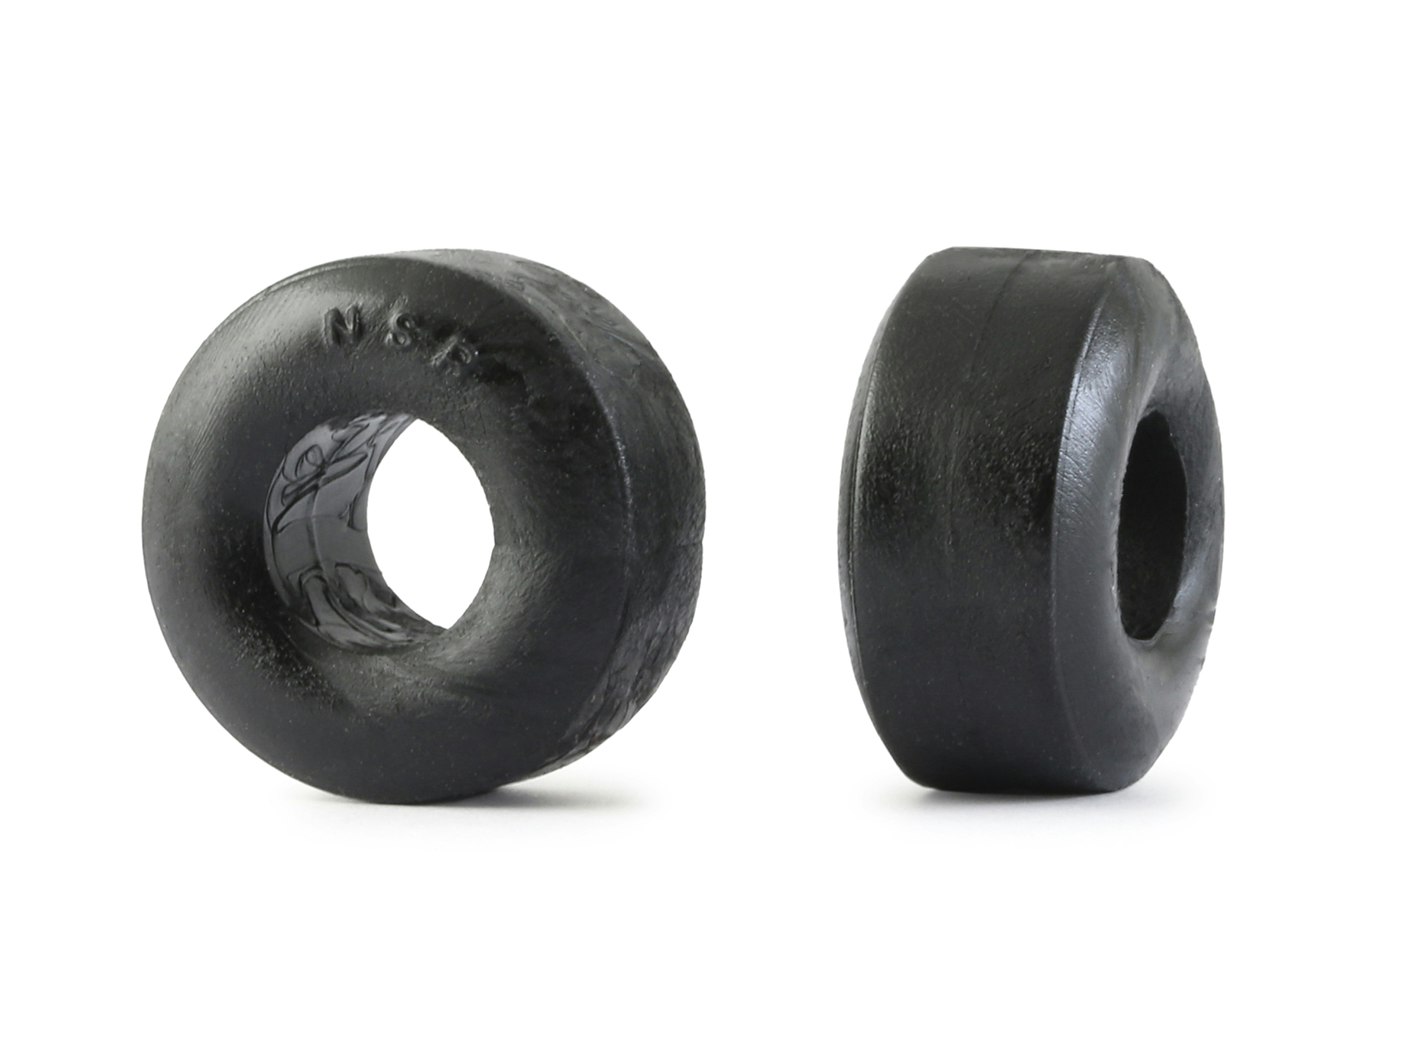 NSR - Vintage Rear - 24 (outer) x 11 (inner) x 10mm (wide)